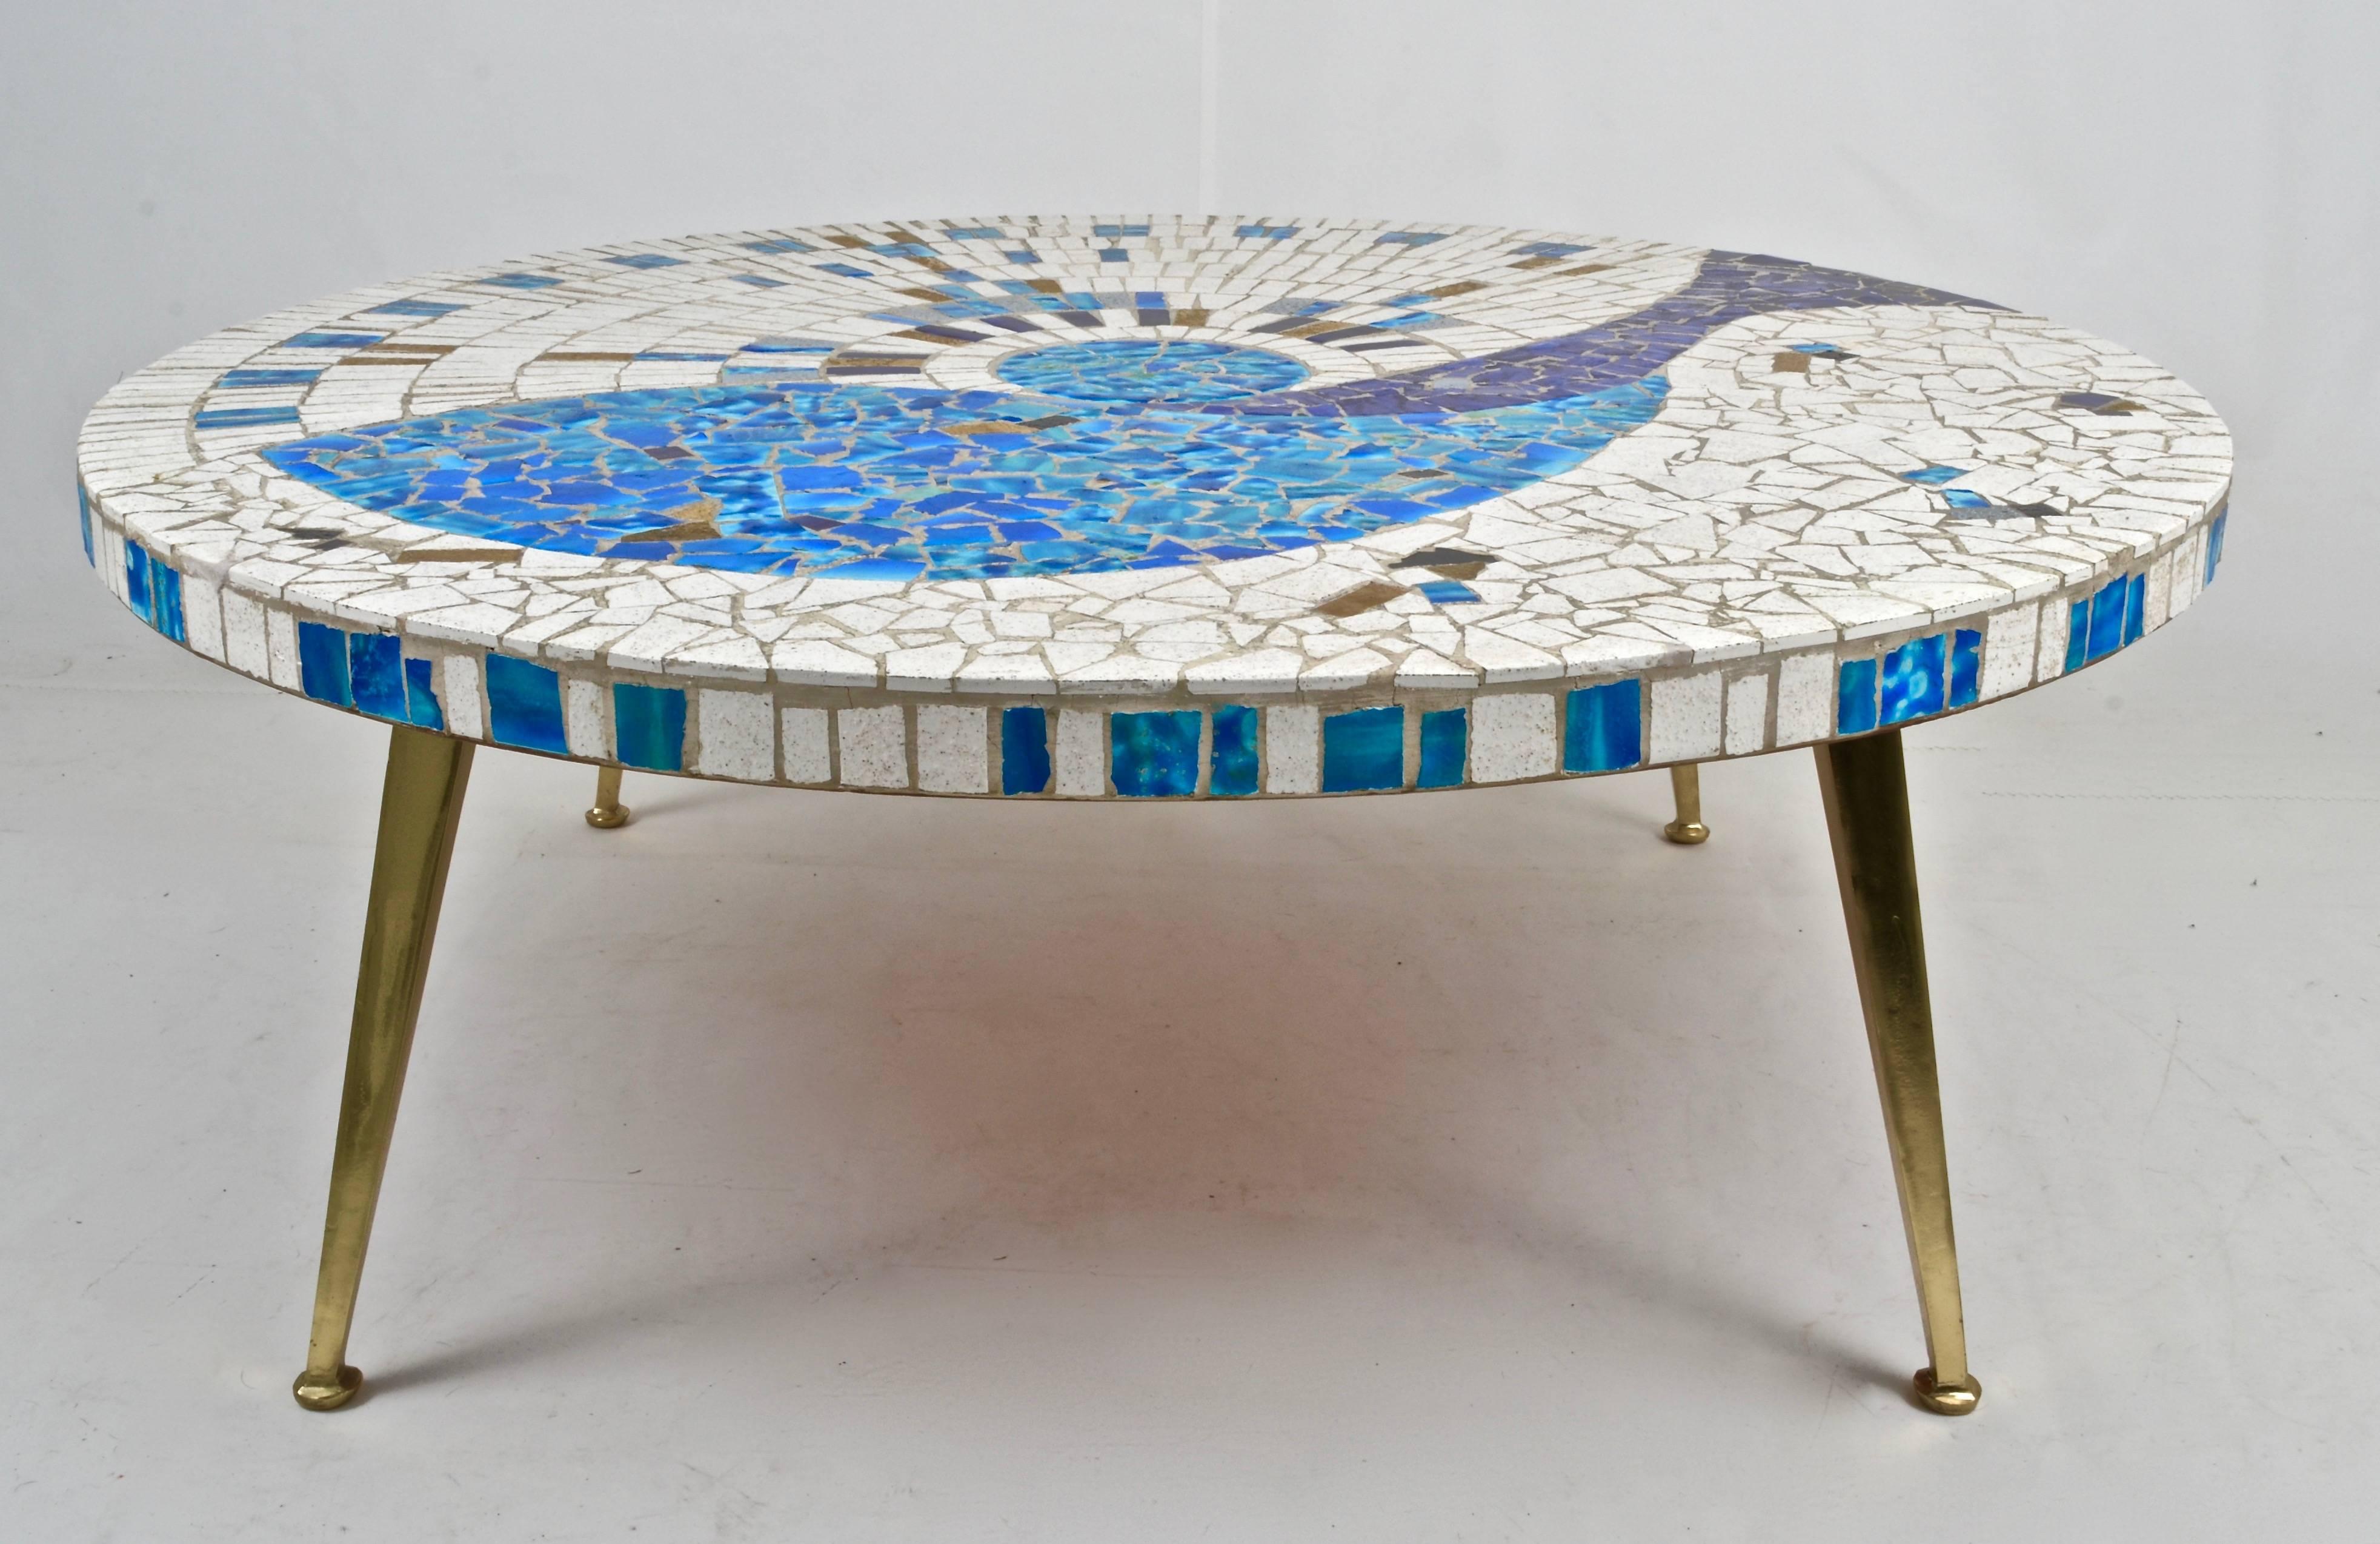 Unusually terrific design and color on this tile-top cocktail table. Modernist tapered brass legs. Very fine vintage condition.